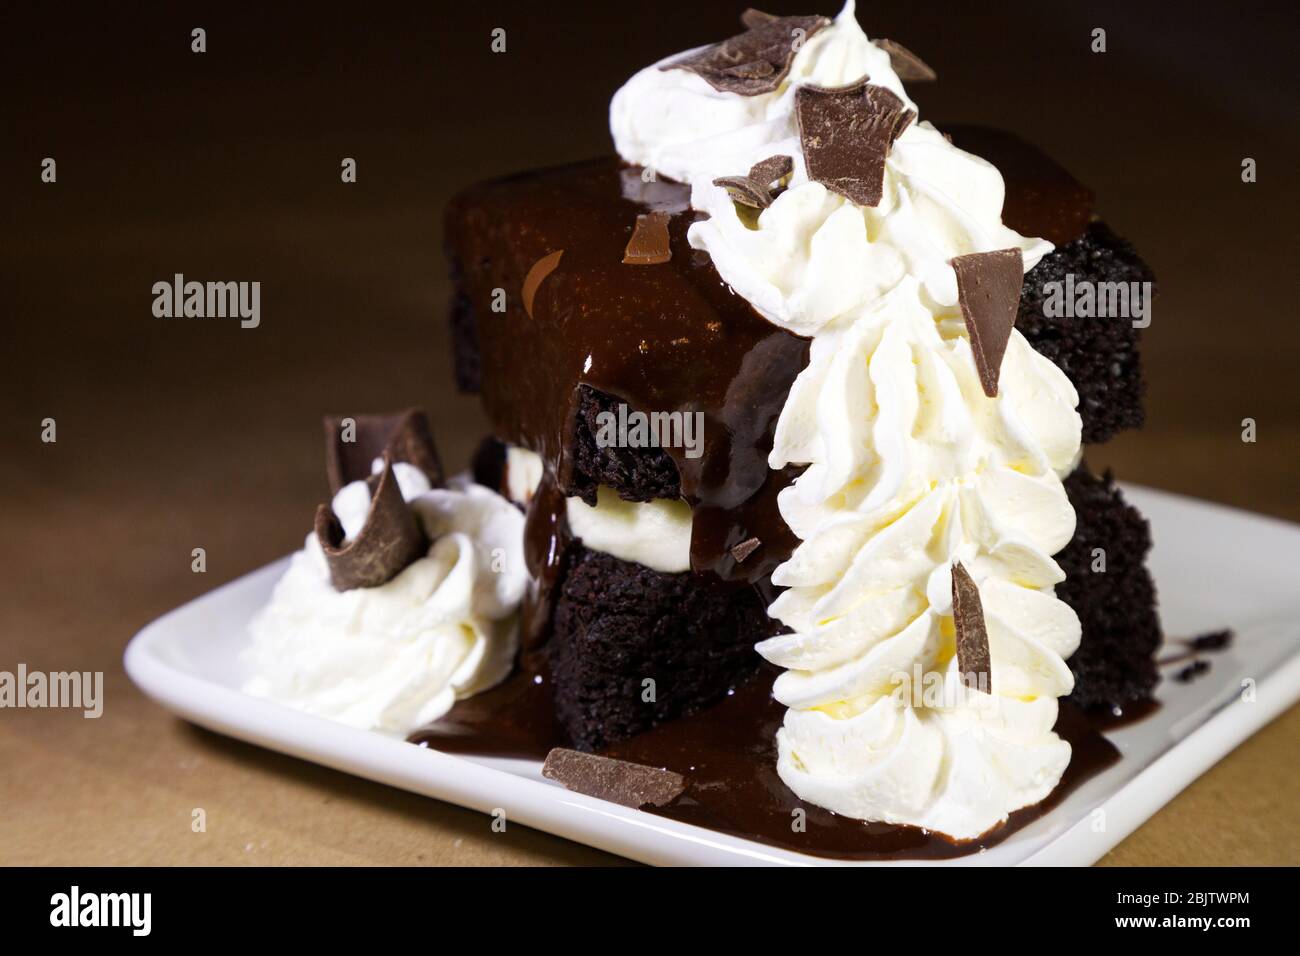 A brownie-style chocolate cake served in Barrington, Nova Scotia, Canada. The dessert is topped with whipped cream and flaked chocolate. Stock Photo